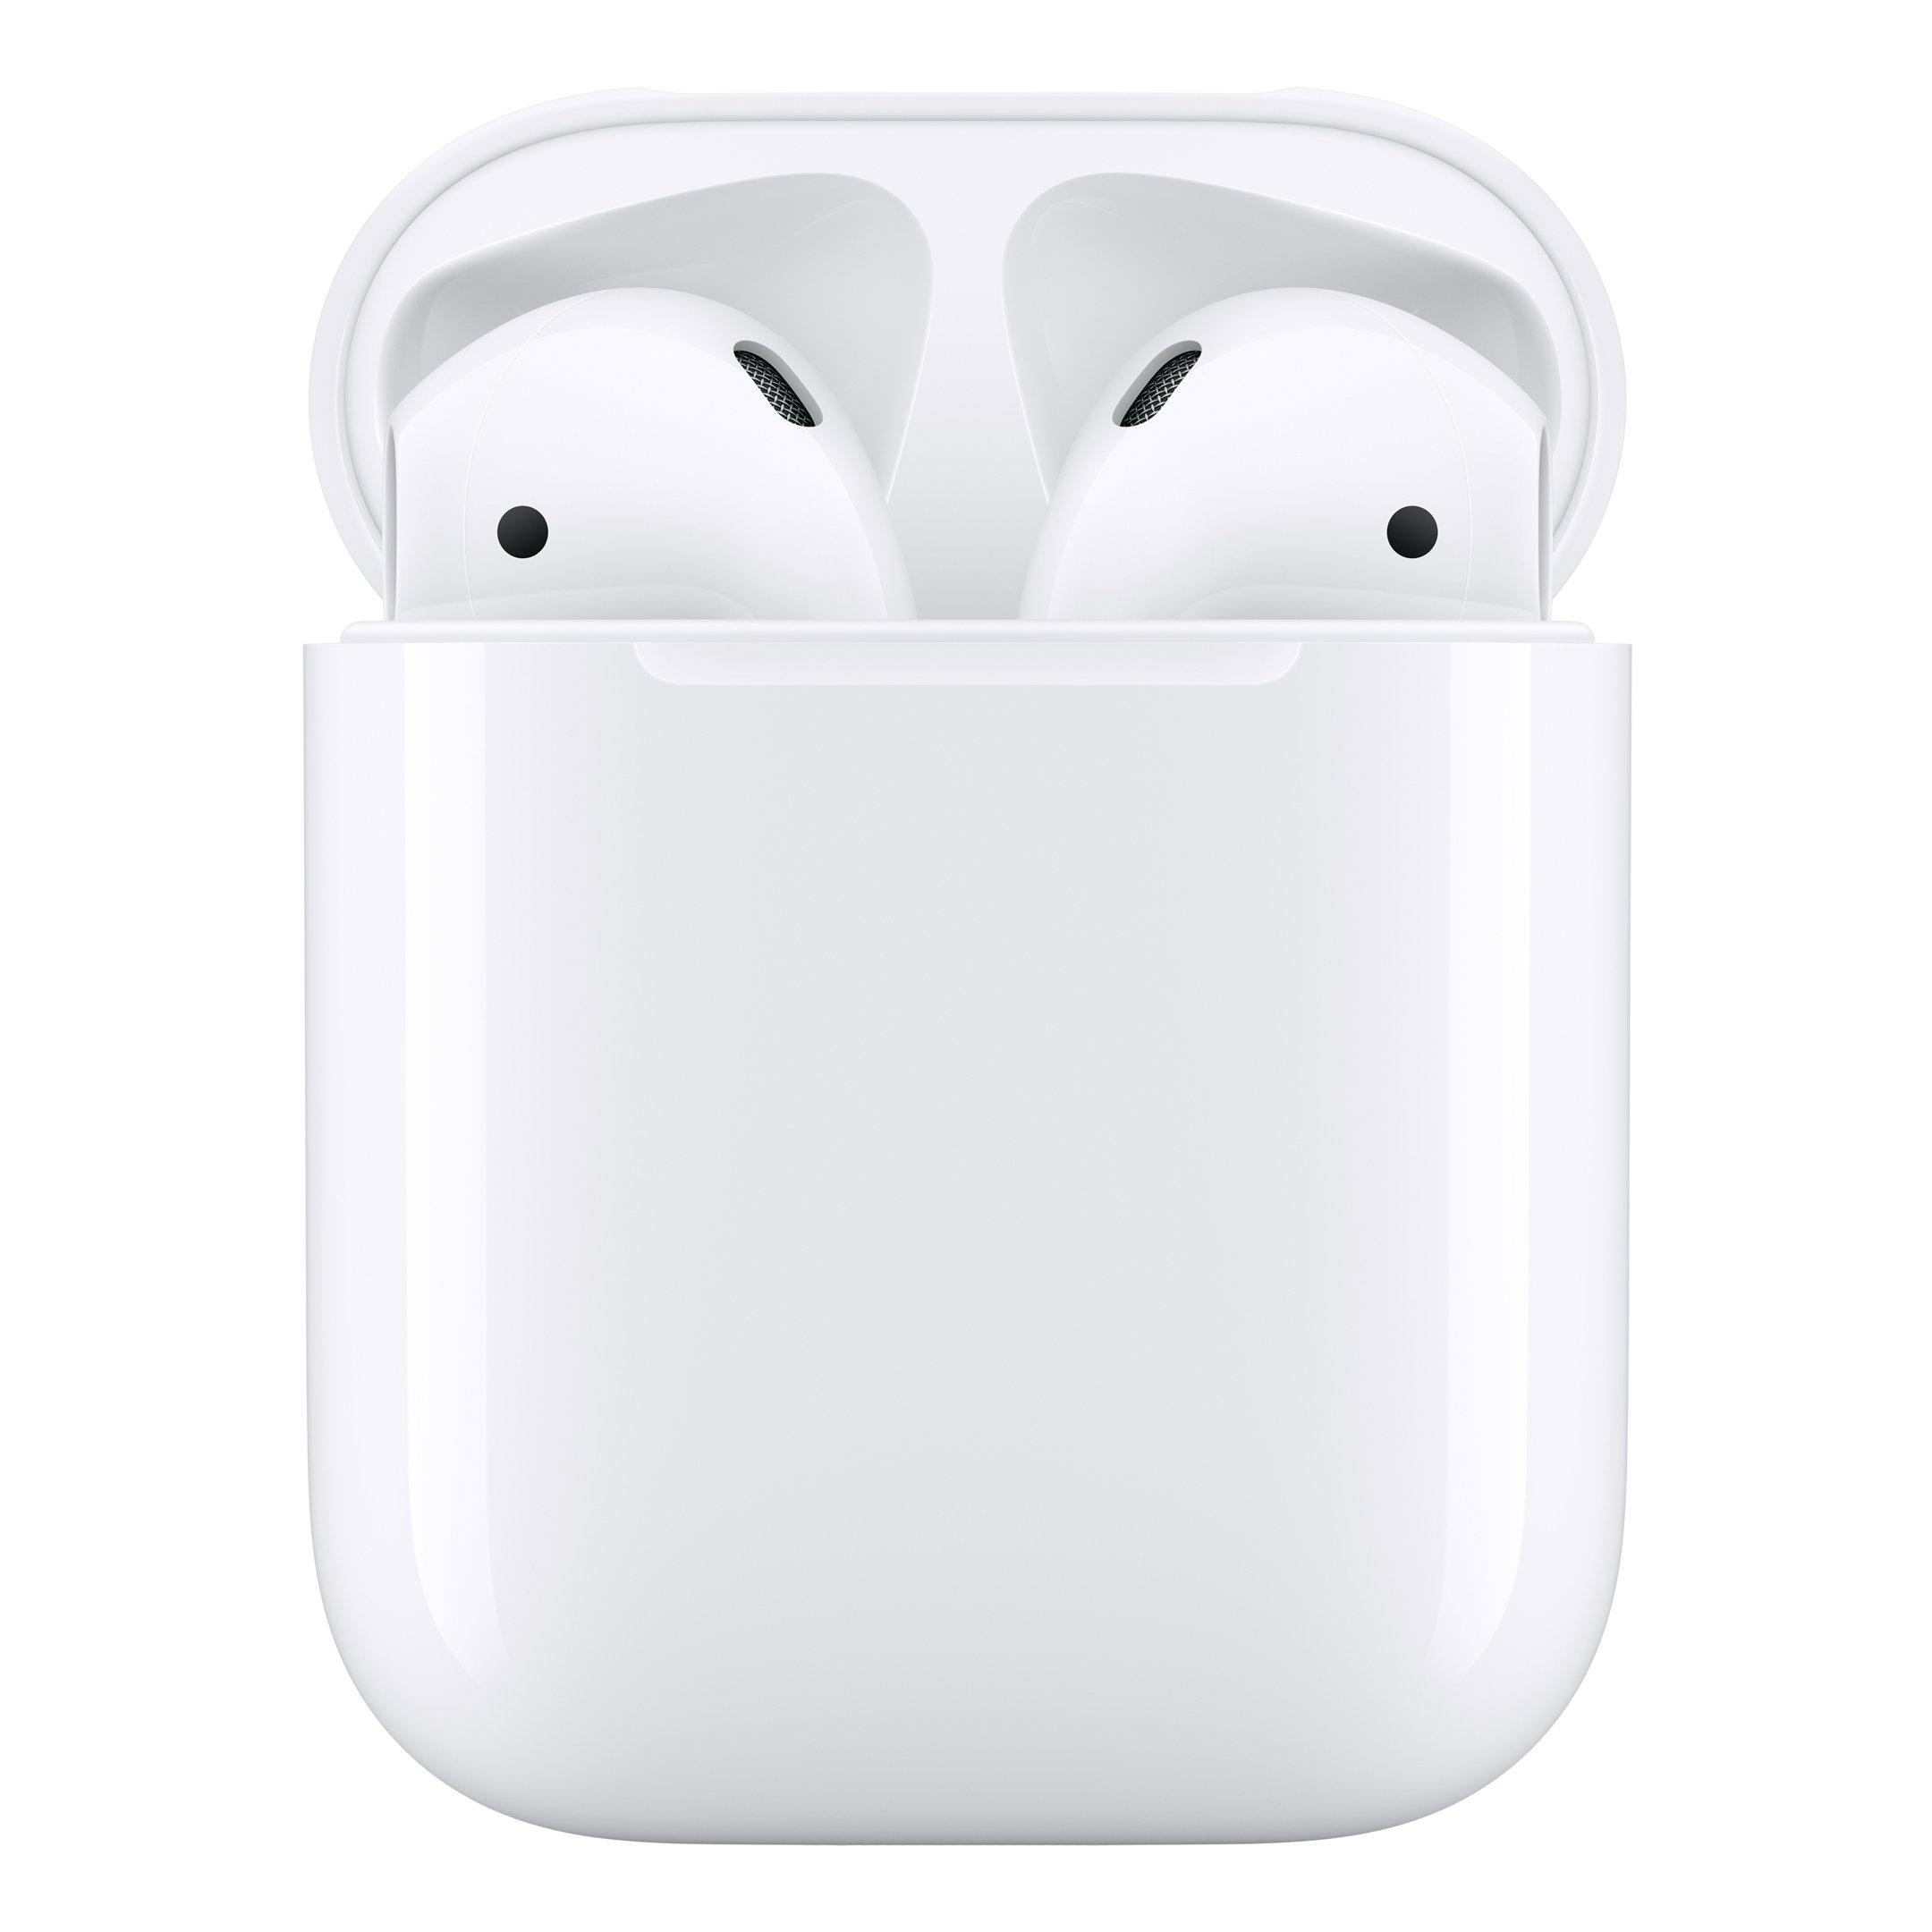 Buy Apple AirPods 2nd Gen with Charging Case, White in Saudi Arabia